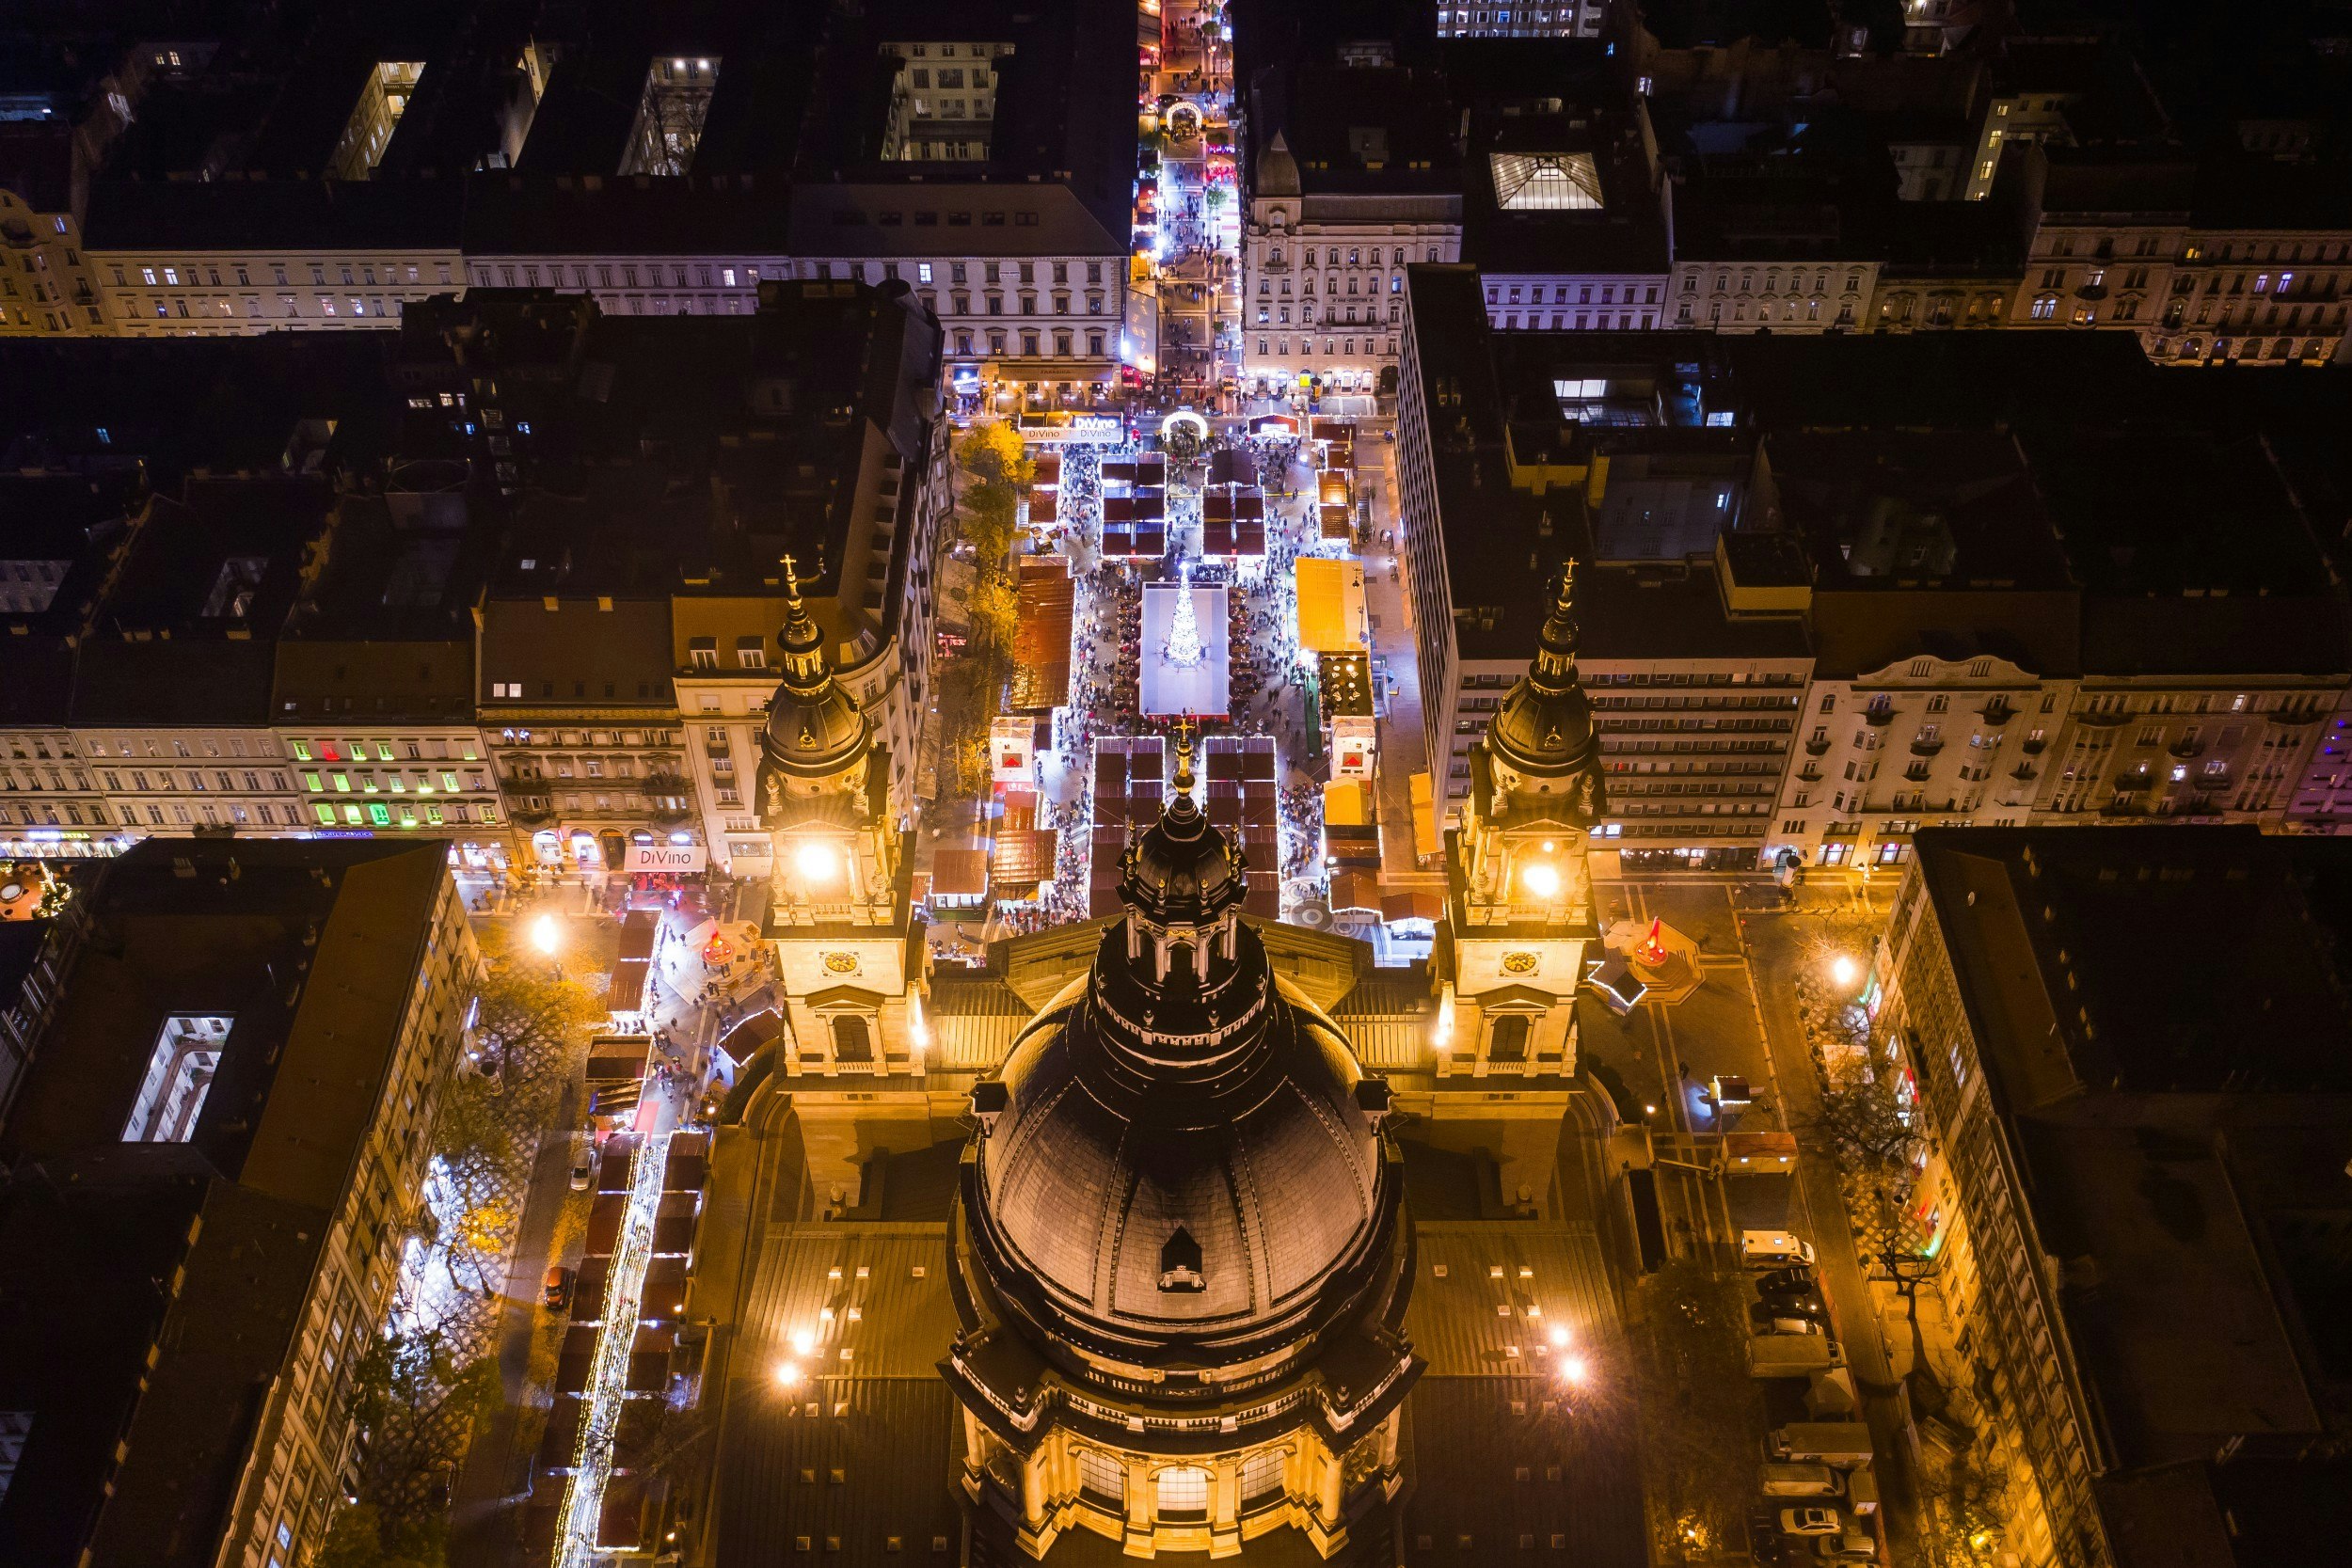 The Advent Feast at the Basilica in Budapest